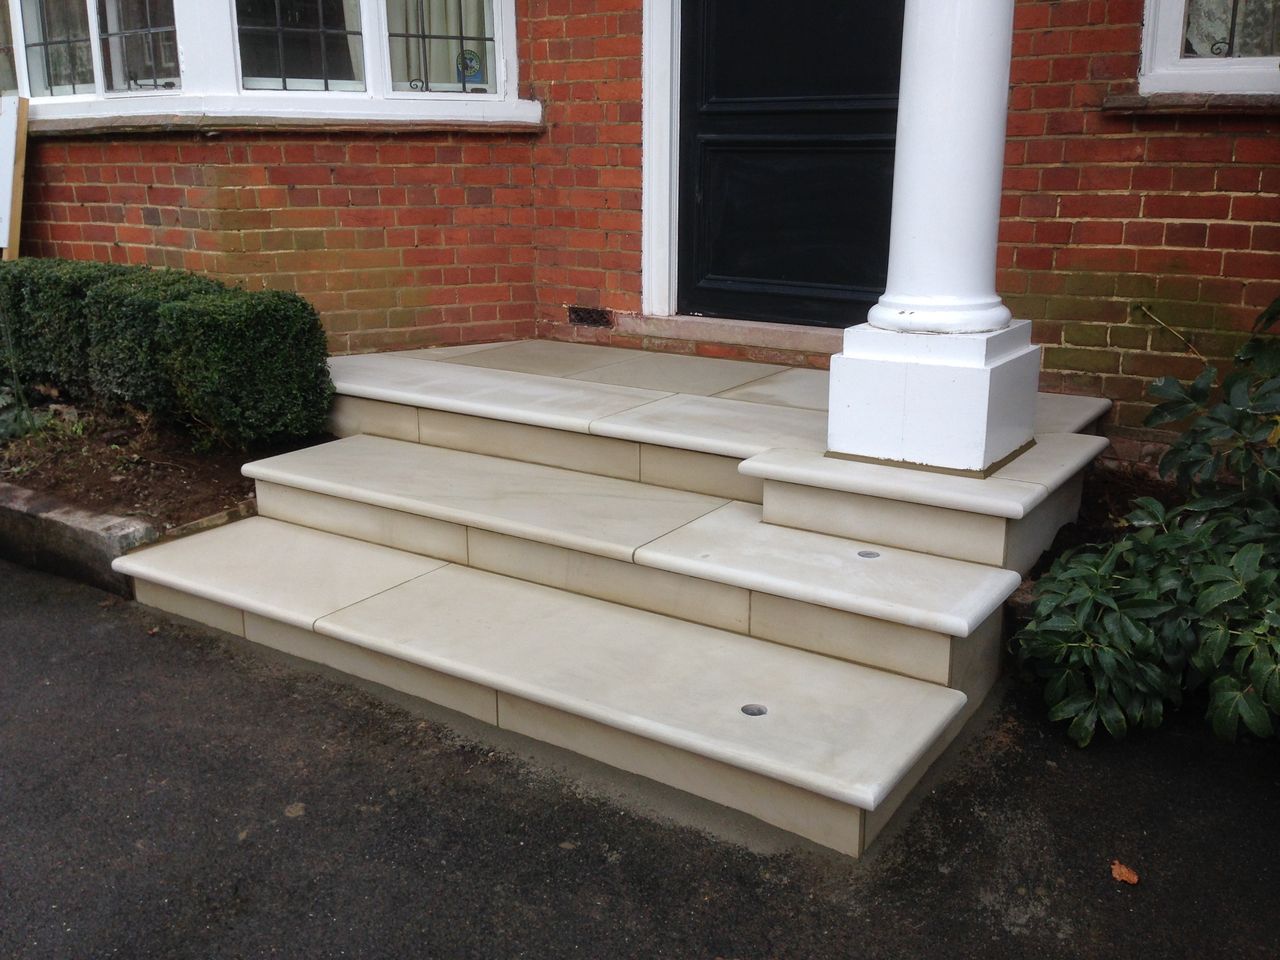 Stone Steps for a Front Porch